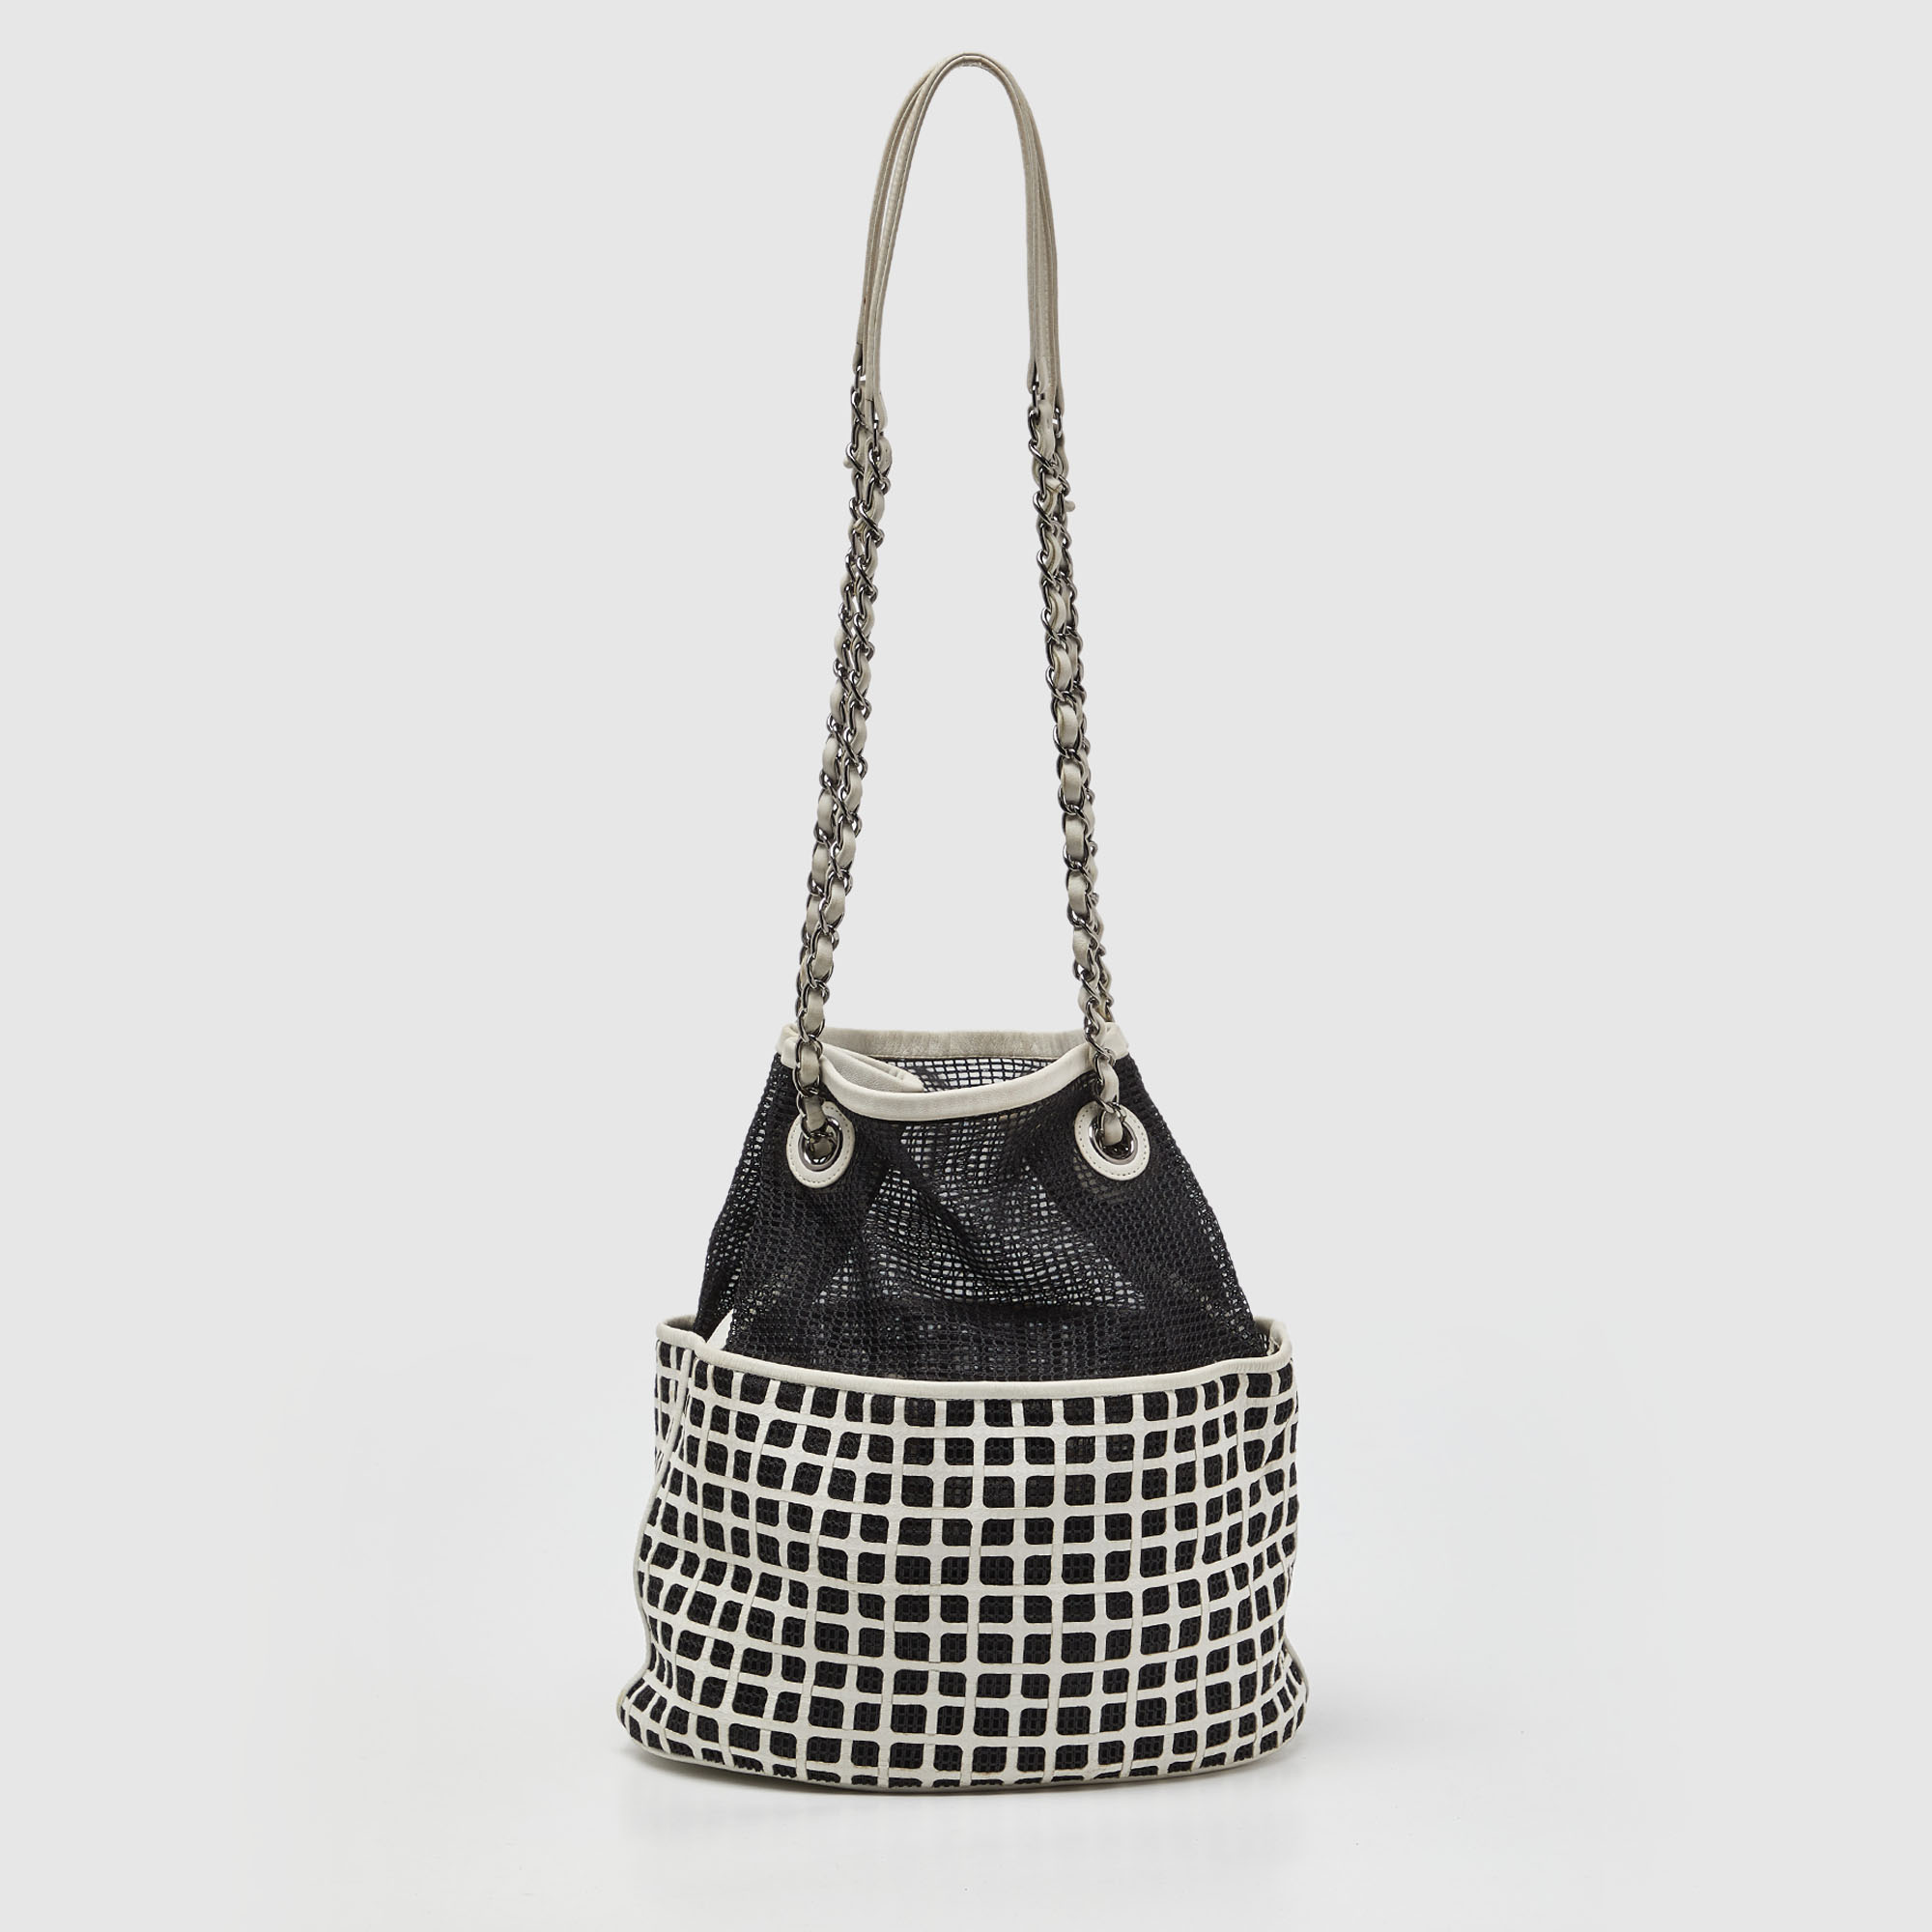 Chanel black/white mesh and leather bucket bag